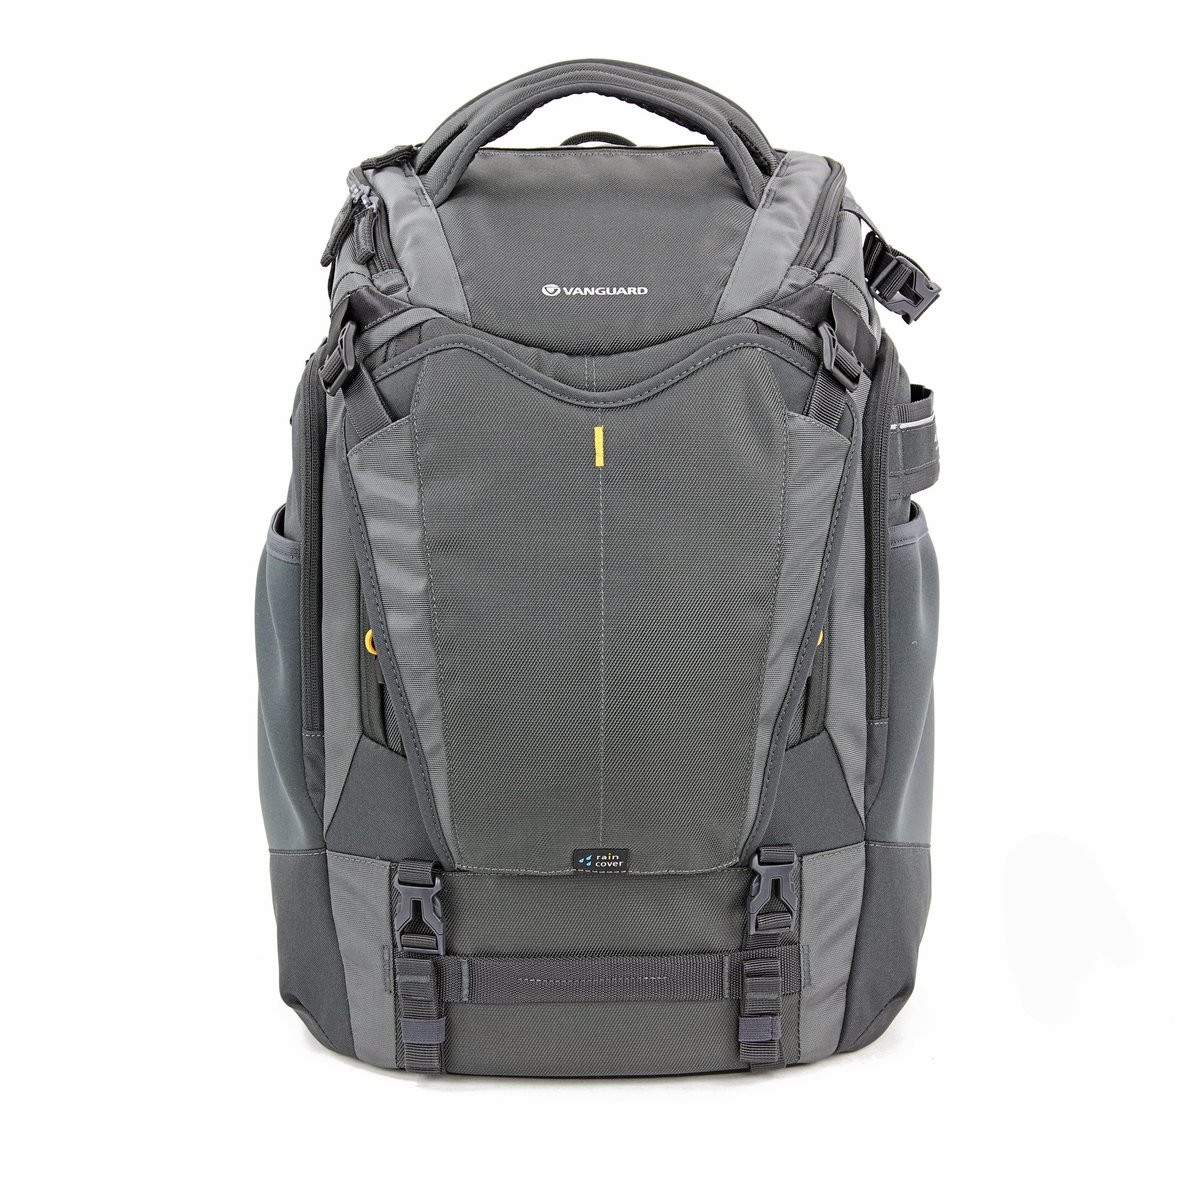 STEAL OF THE WEEK (while supplies last) - Alta Sky 49 Camera Backpack - Black/Gray